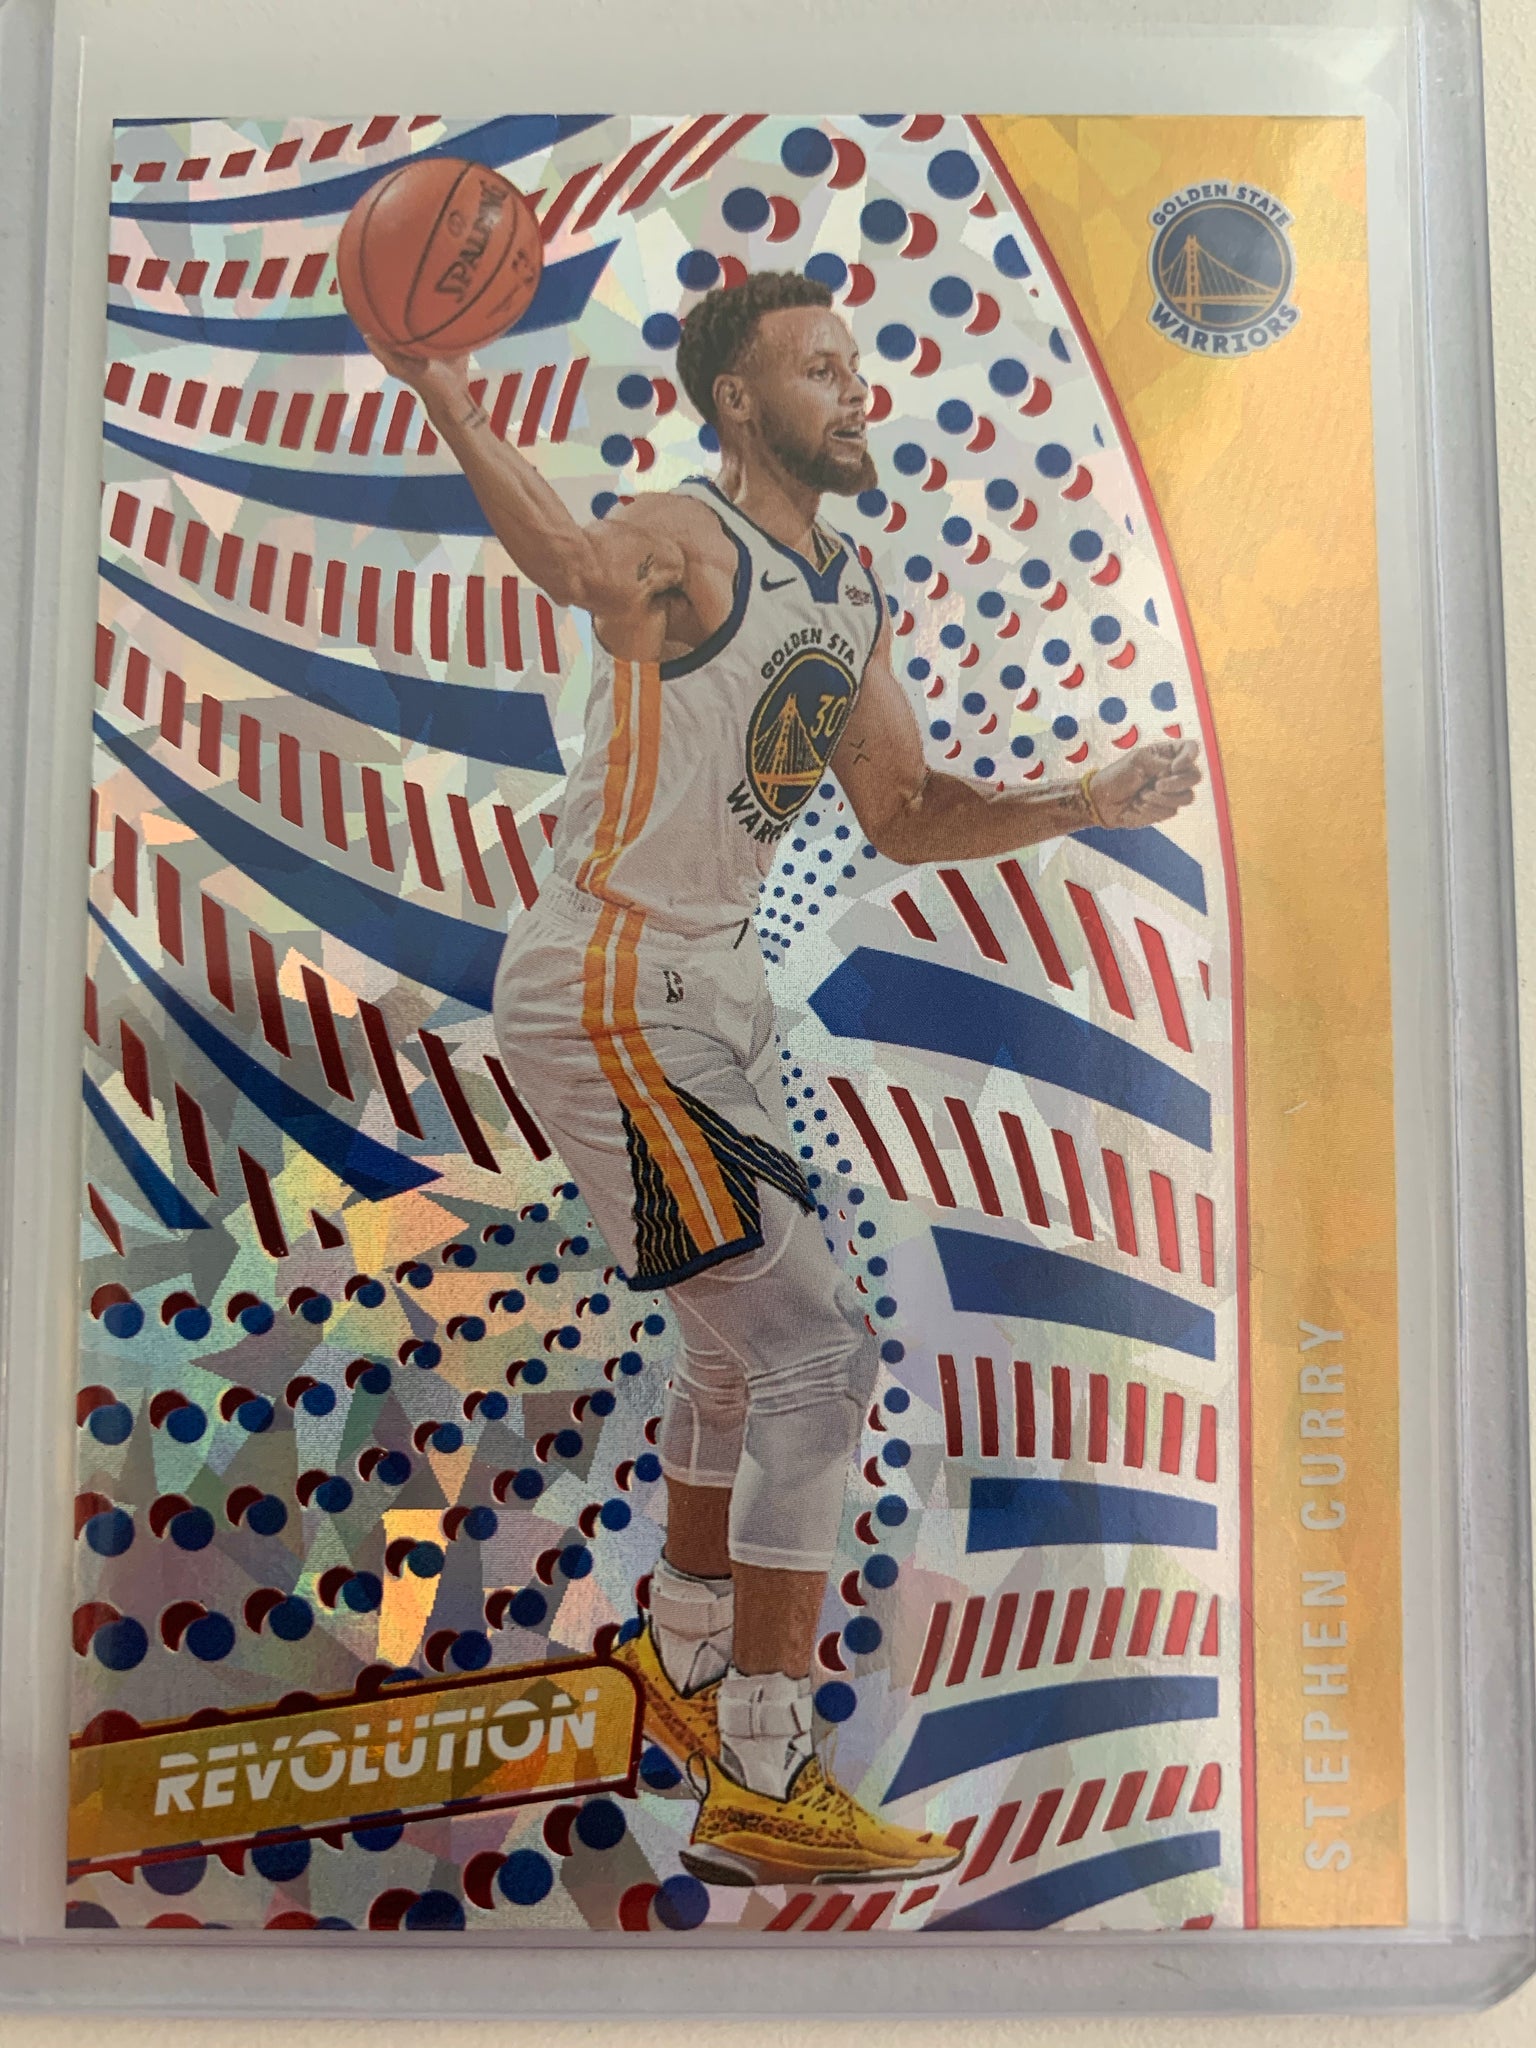 2020-2021 PANINI REVOLUTION NBA BASKETBALL #90 GOLDEN STATE WARRIORS - STEPHEN CURRY CNY CRACKED ICE PARALLEL CARD